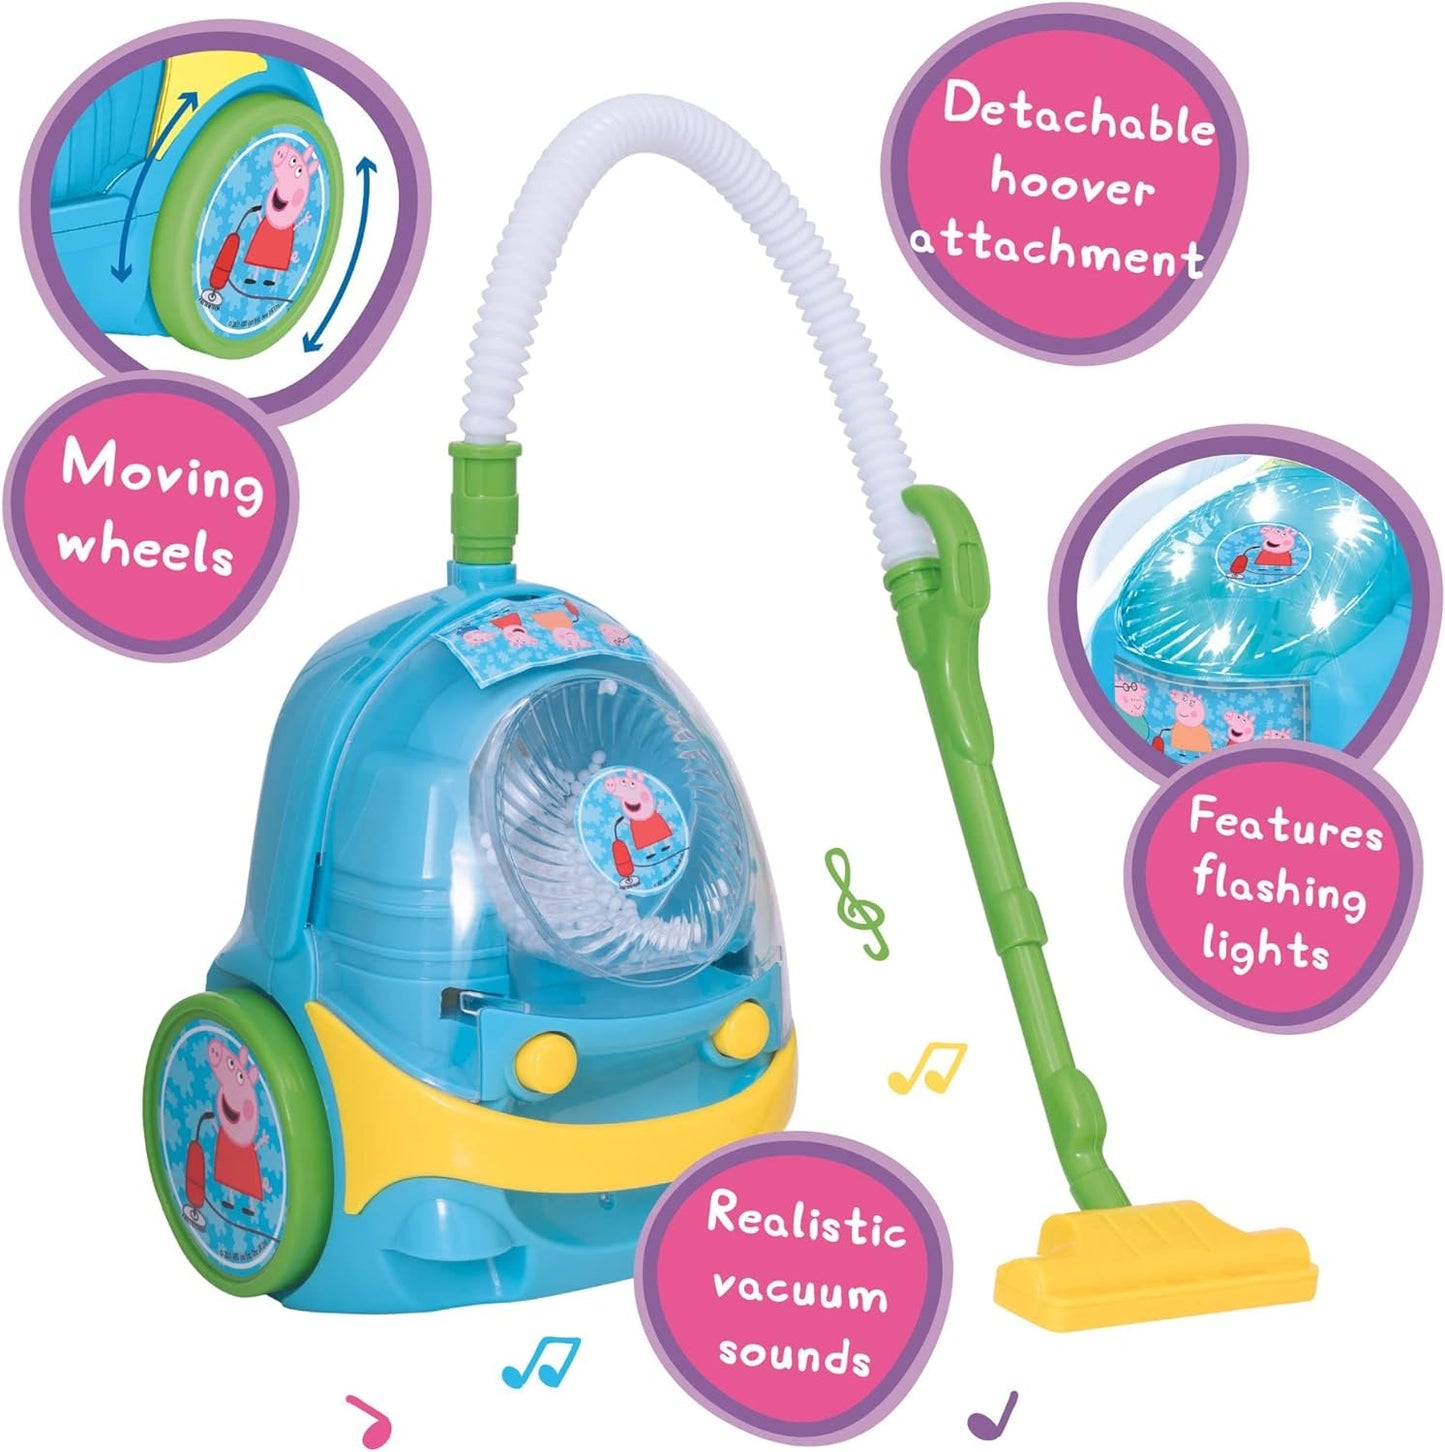 Single Peppa pig Cleaning Appliance